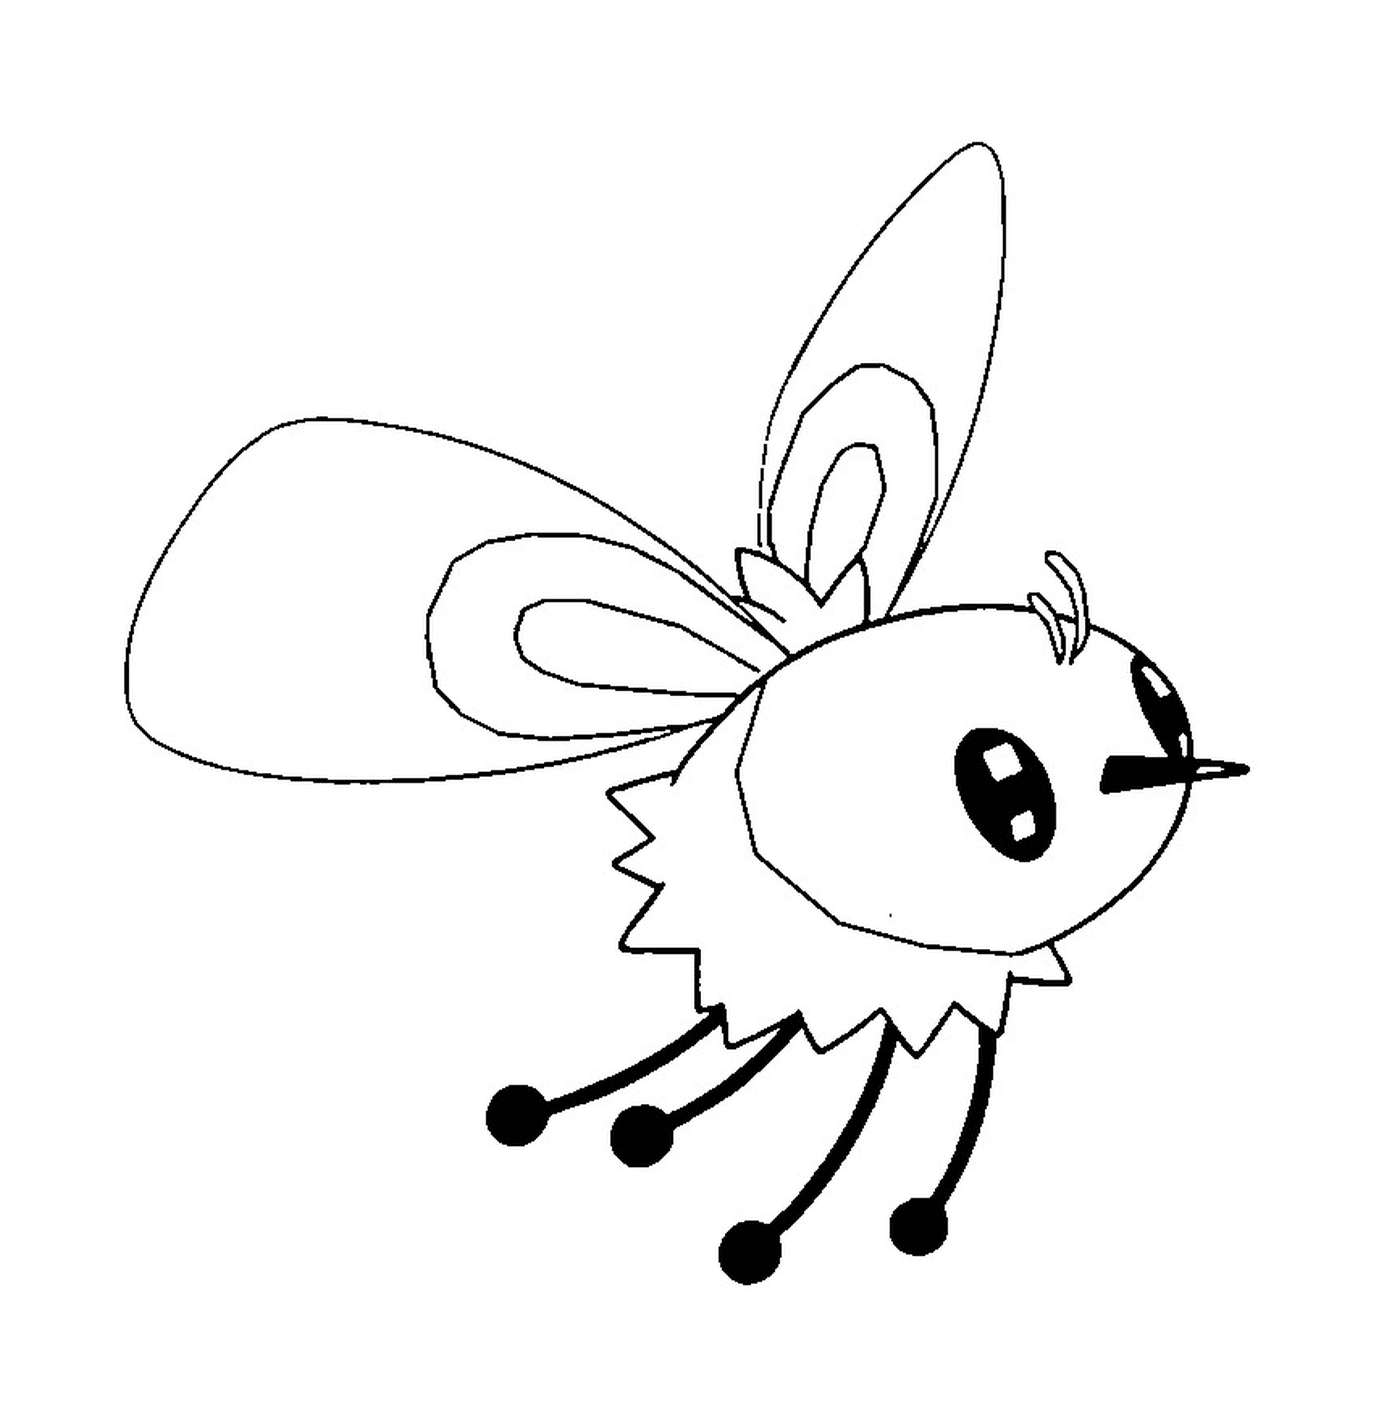  Bombydou, an insect 